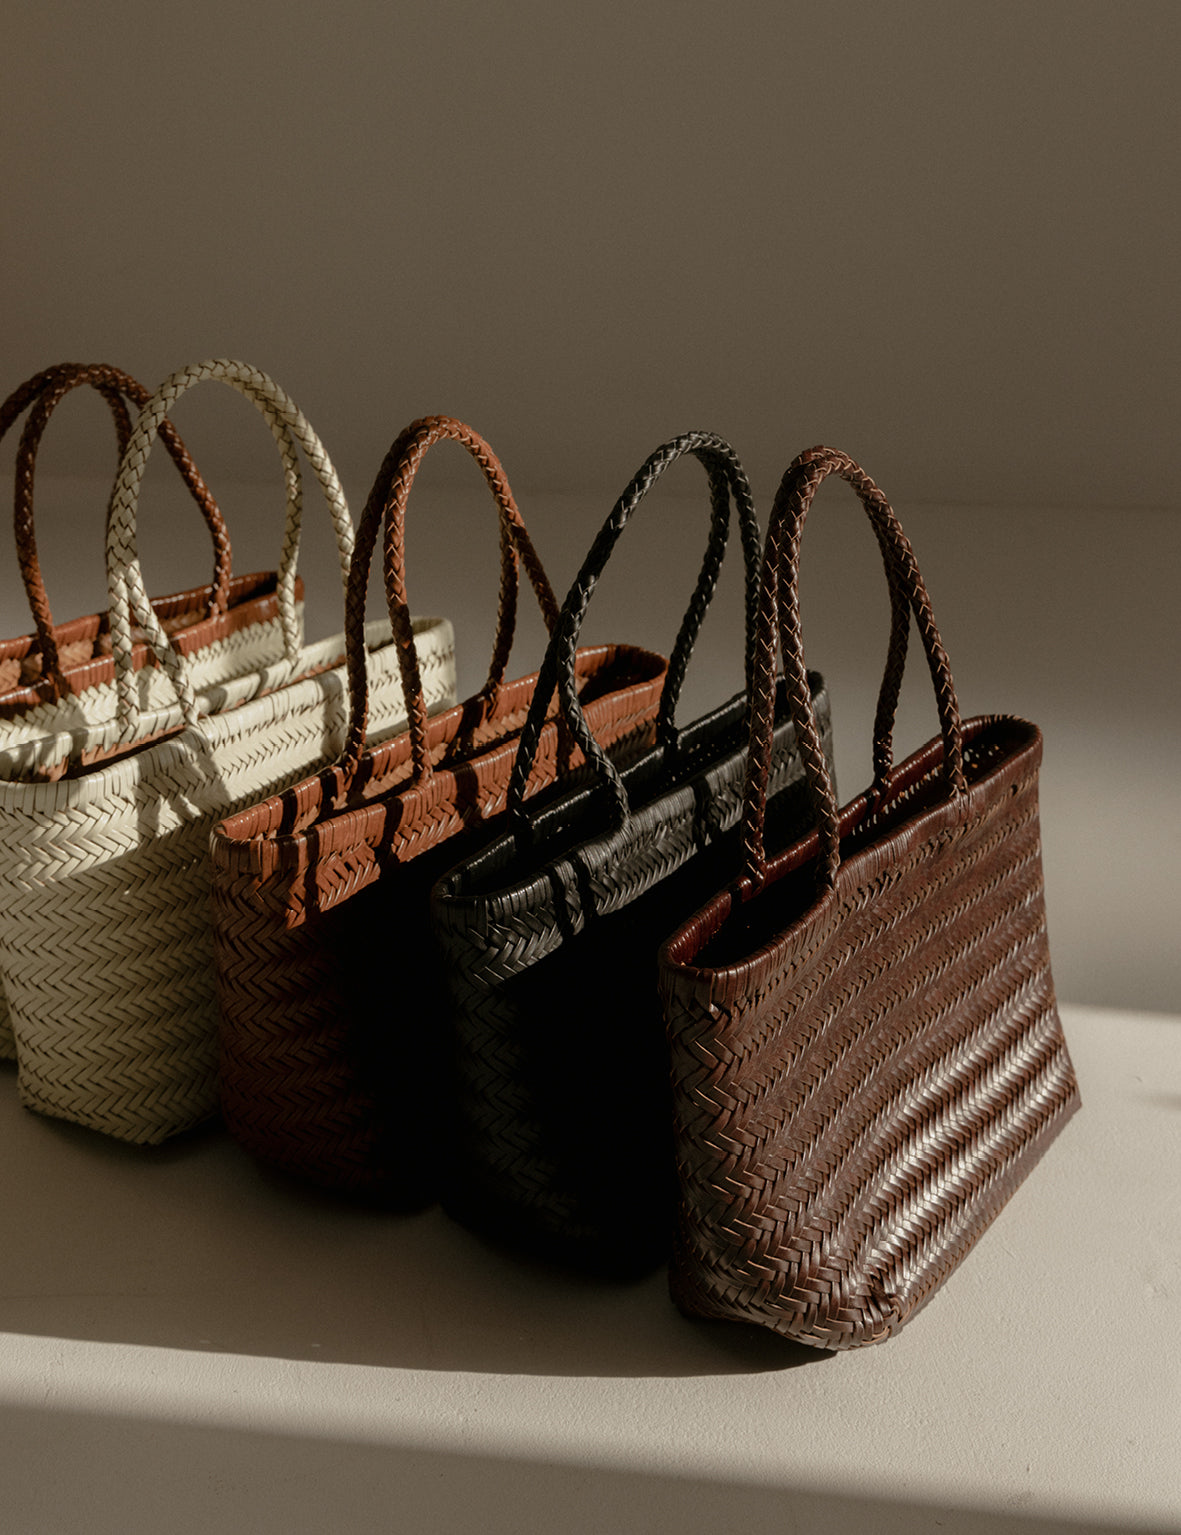 Discover our debut bag collection